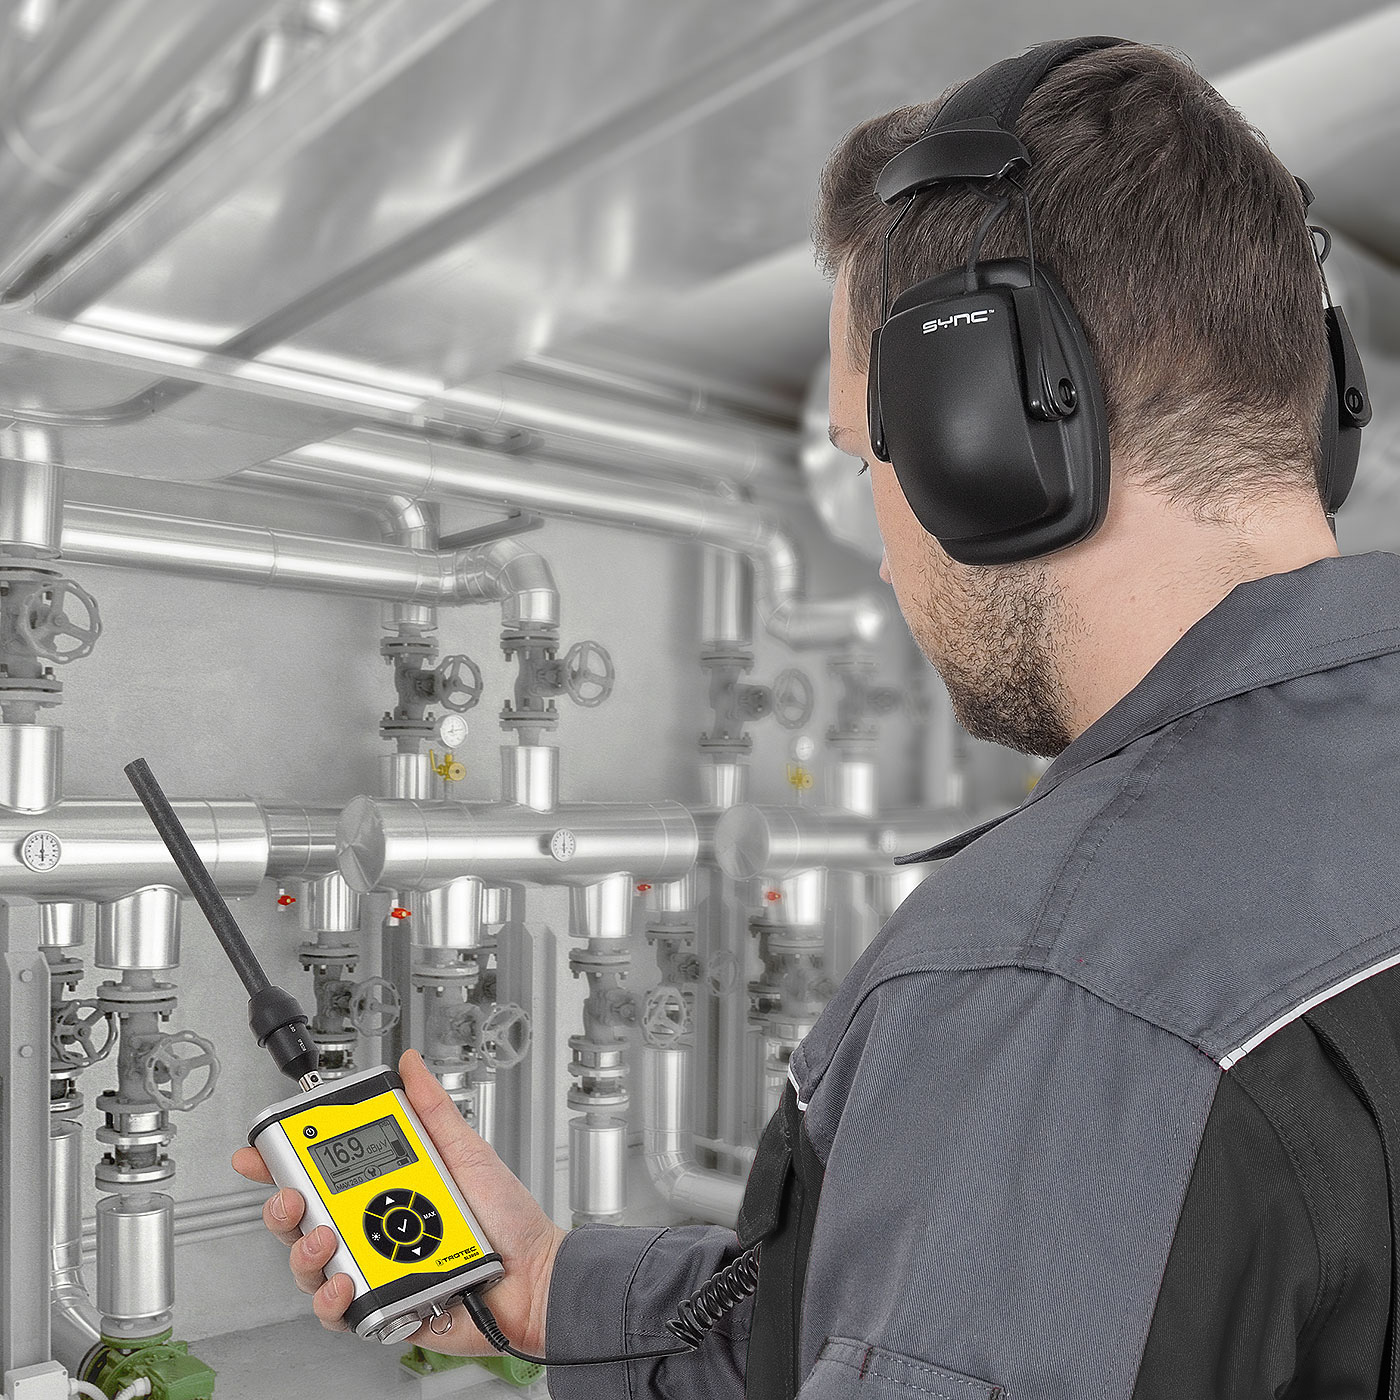 Ultrasonic measuring devices for the detection of compressed air leaks